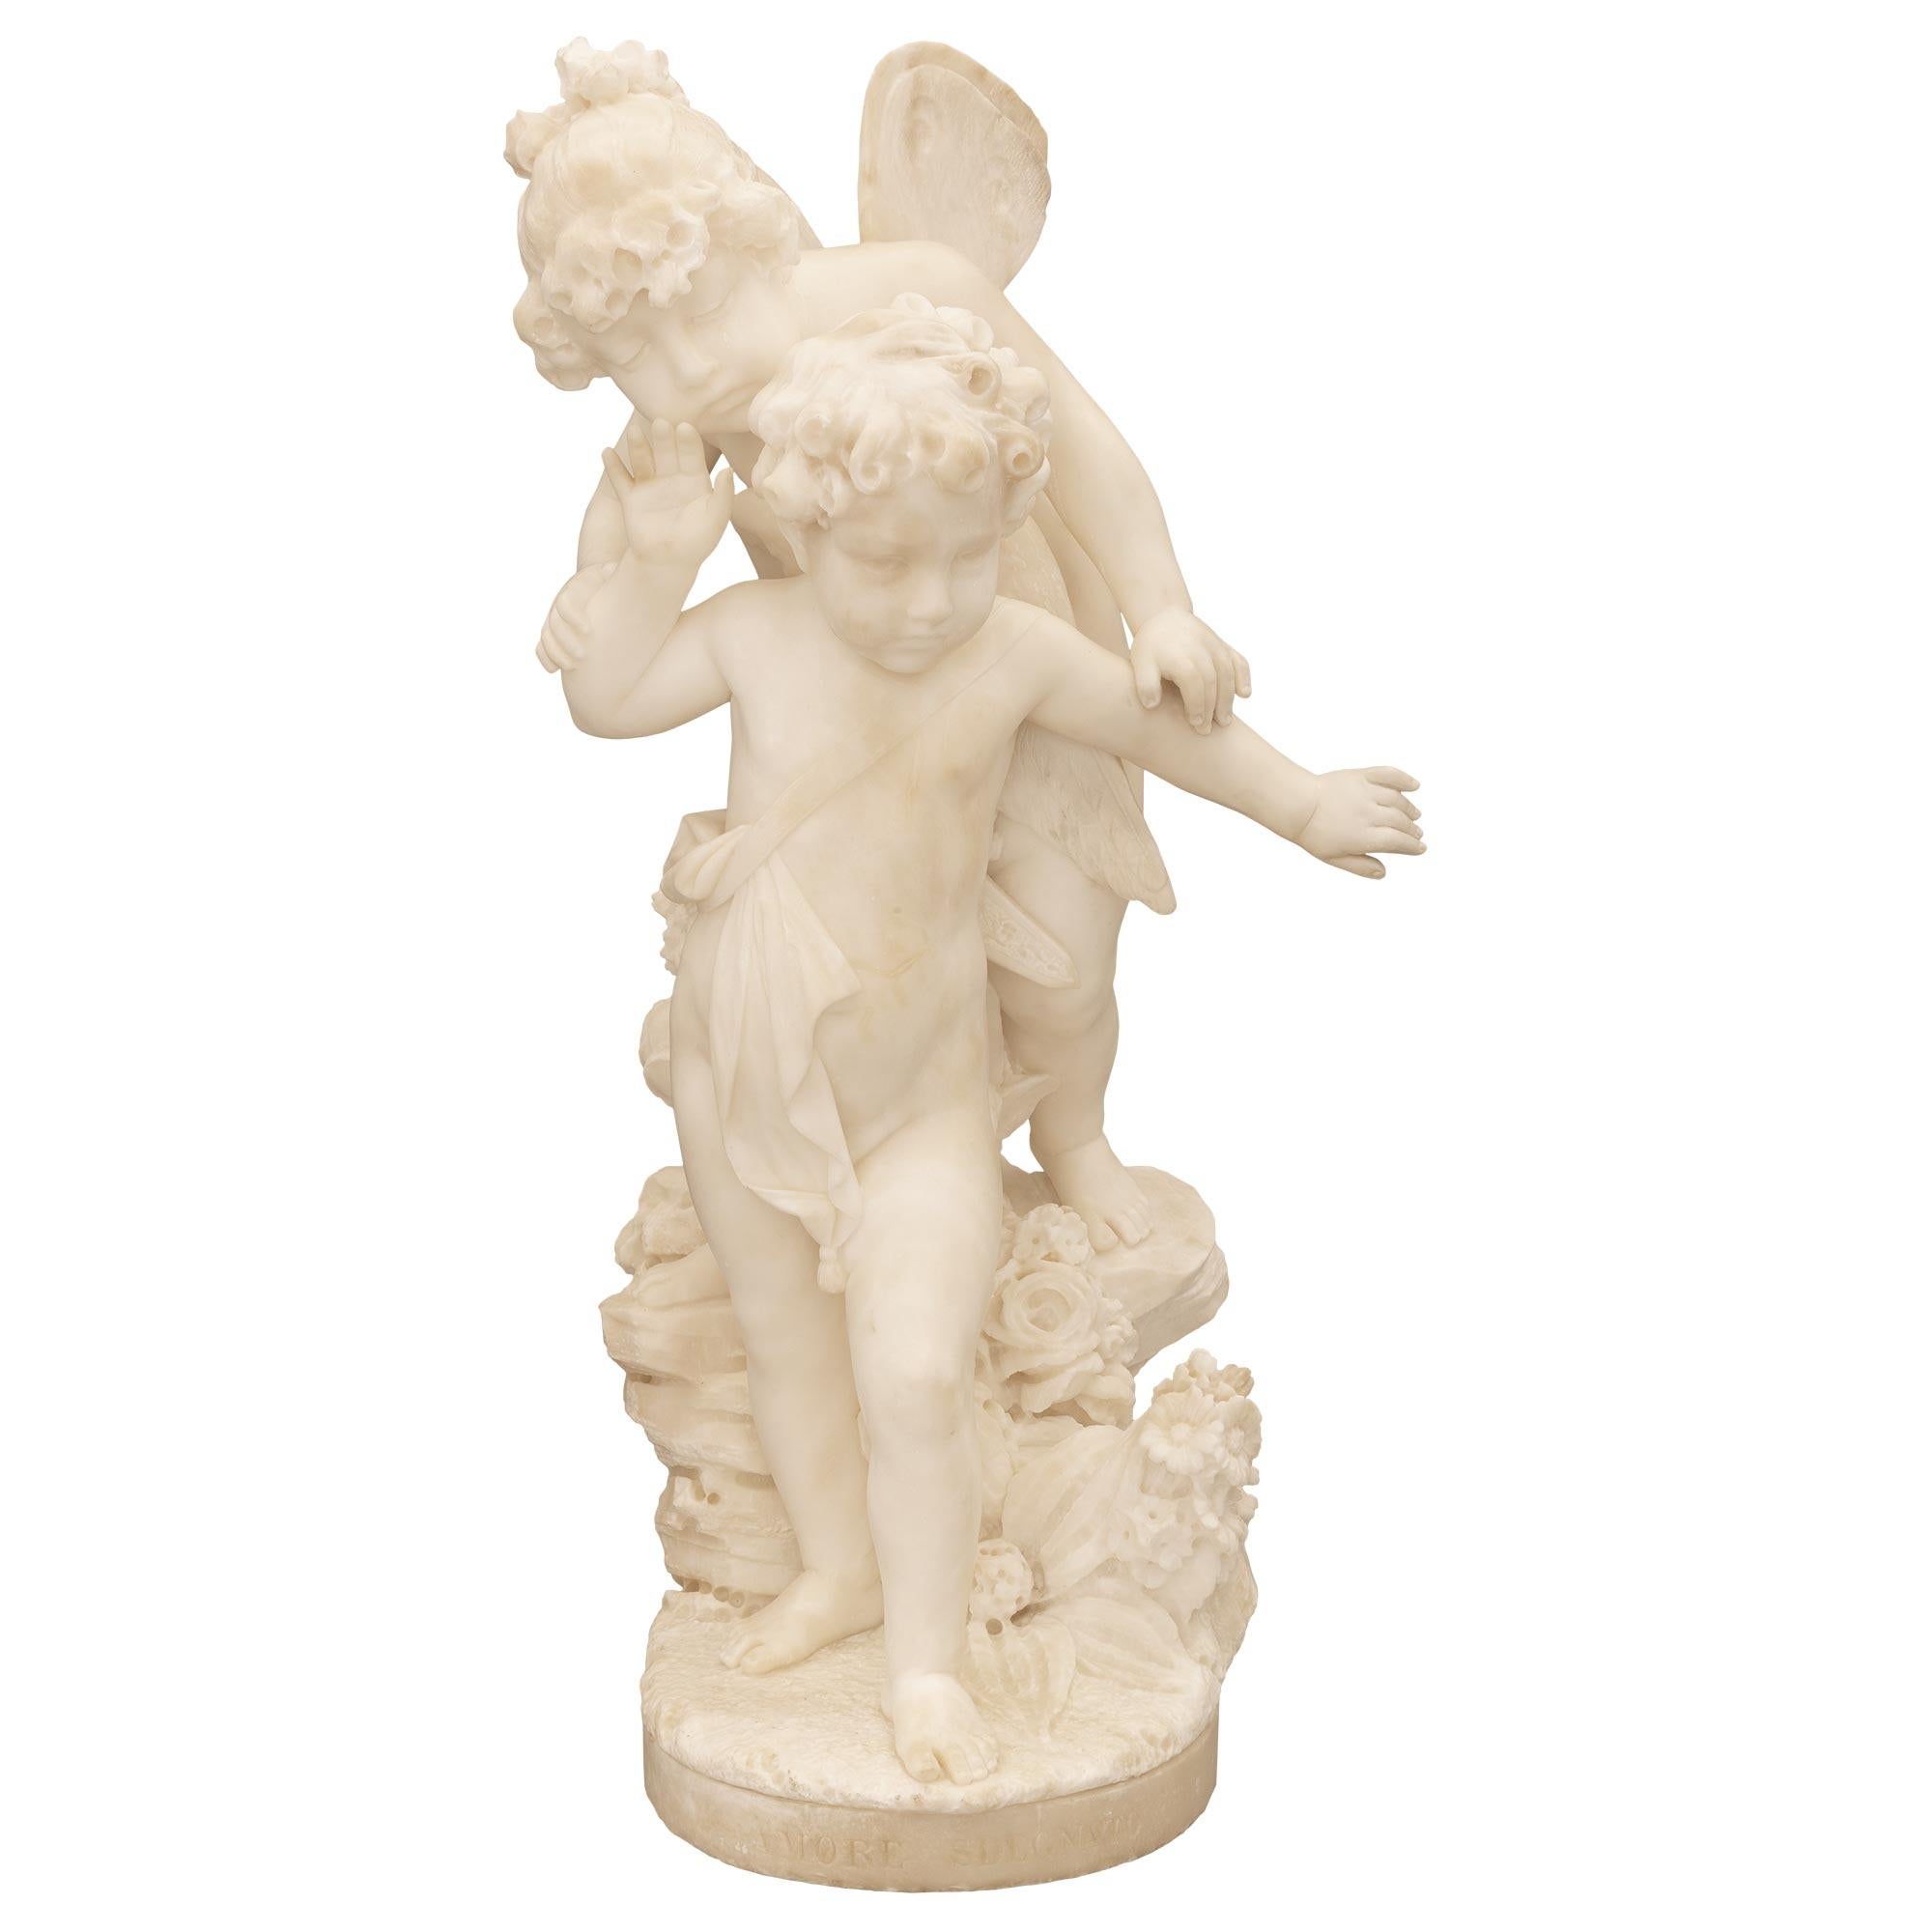 A charming and very high quality Italian 19th century white Carrara marble statue titled 